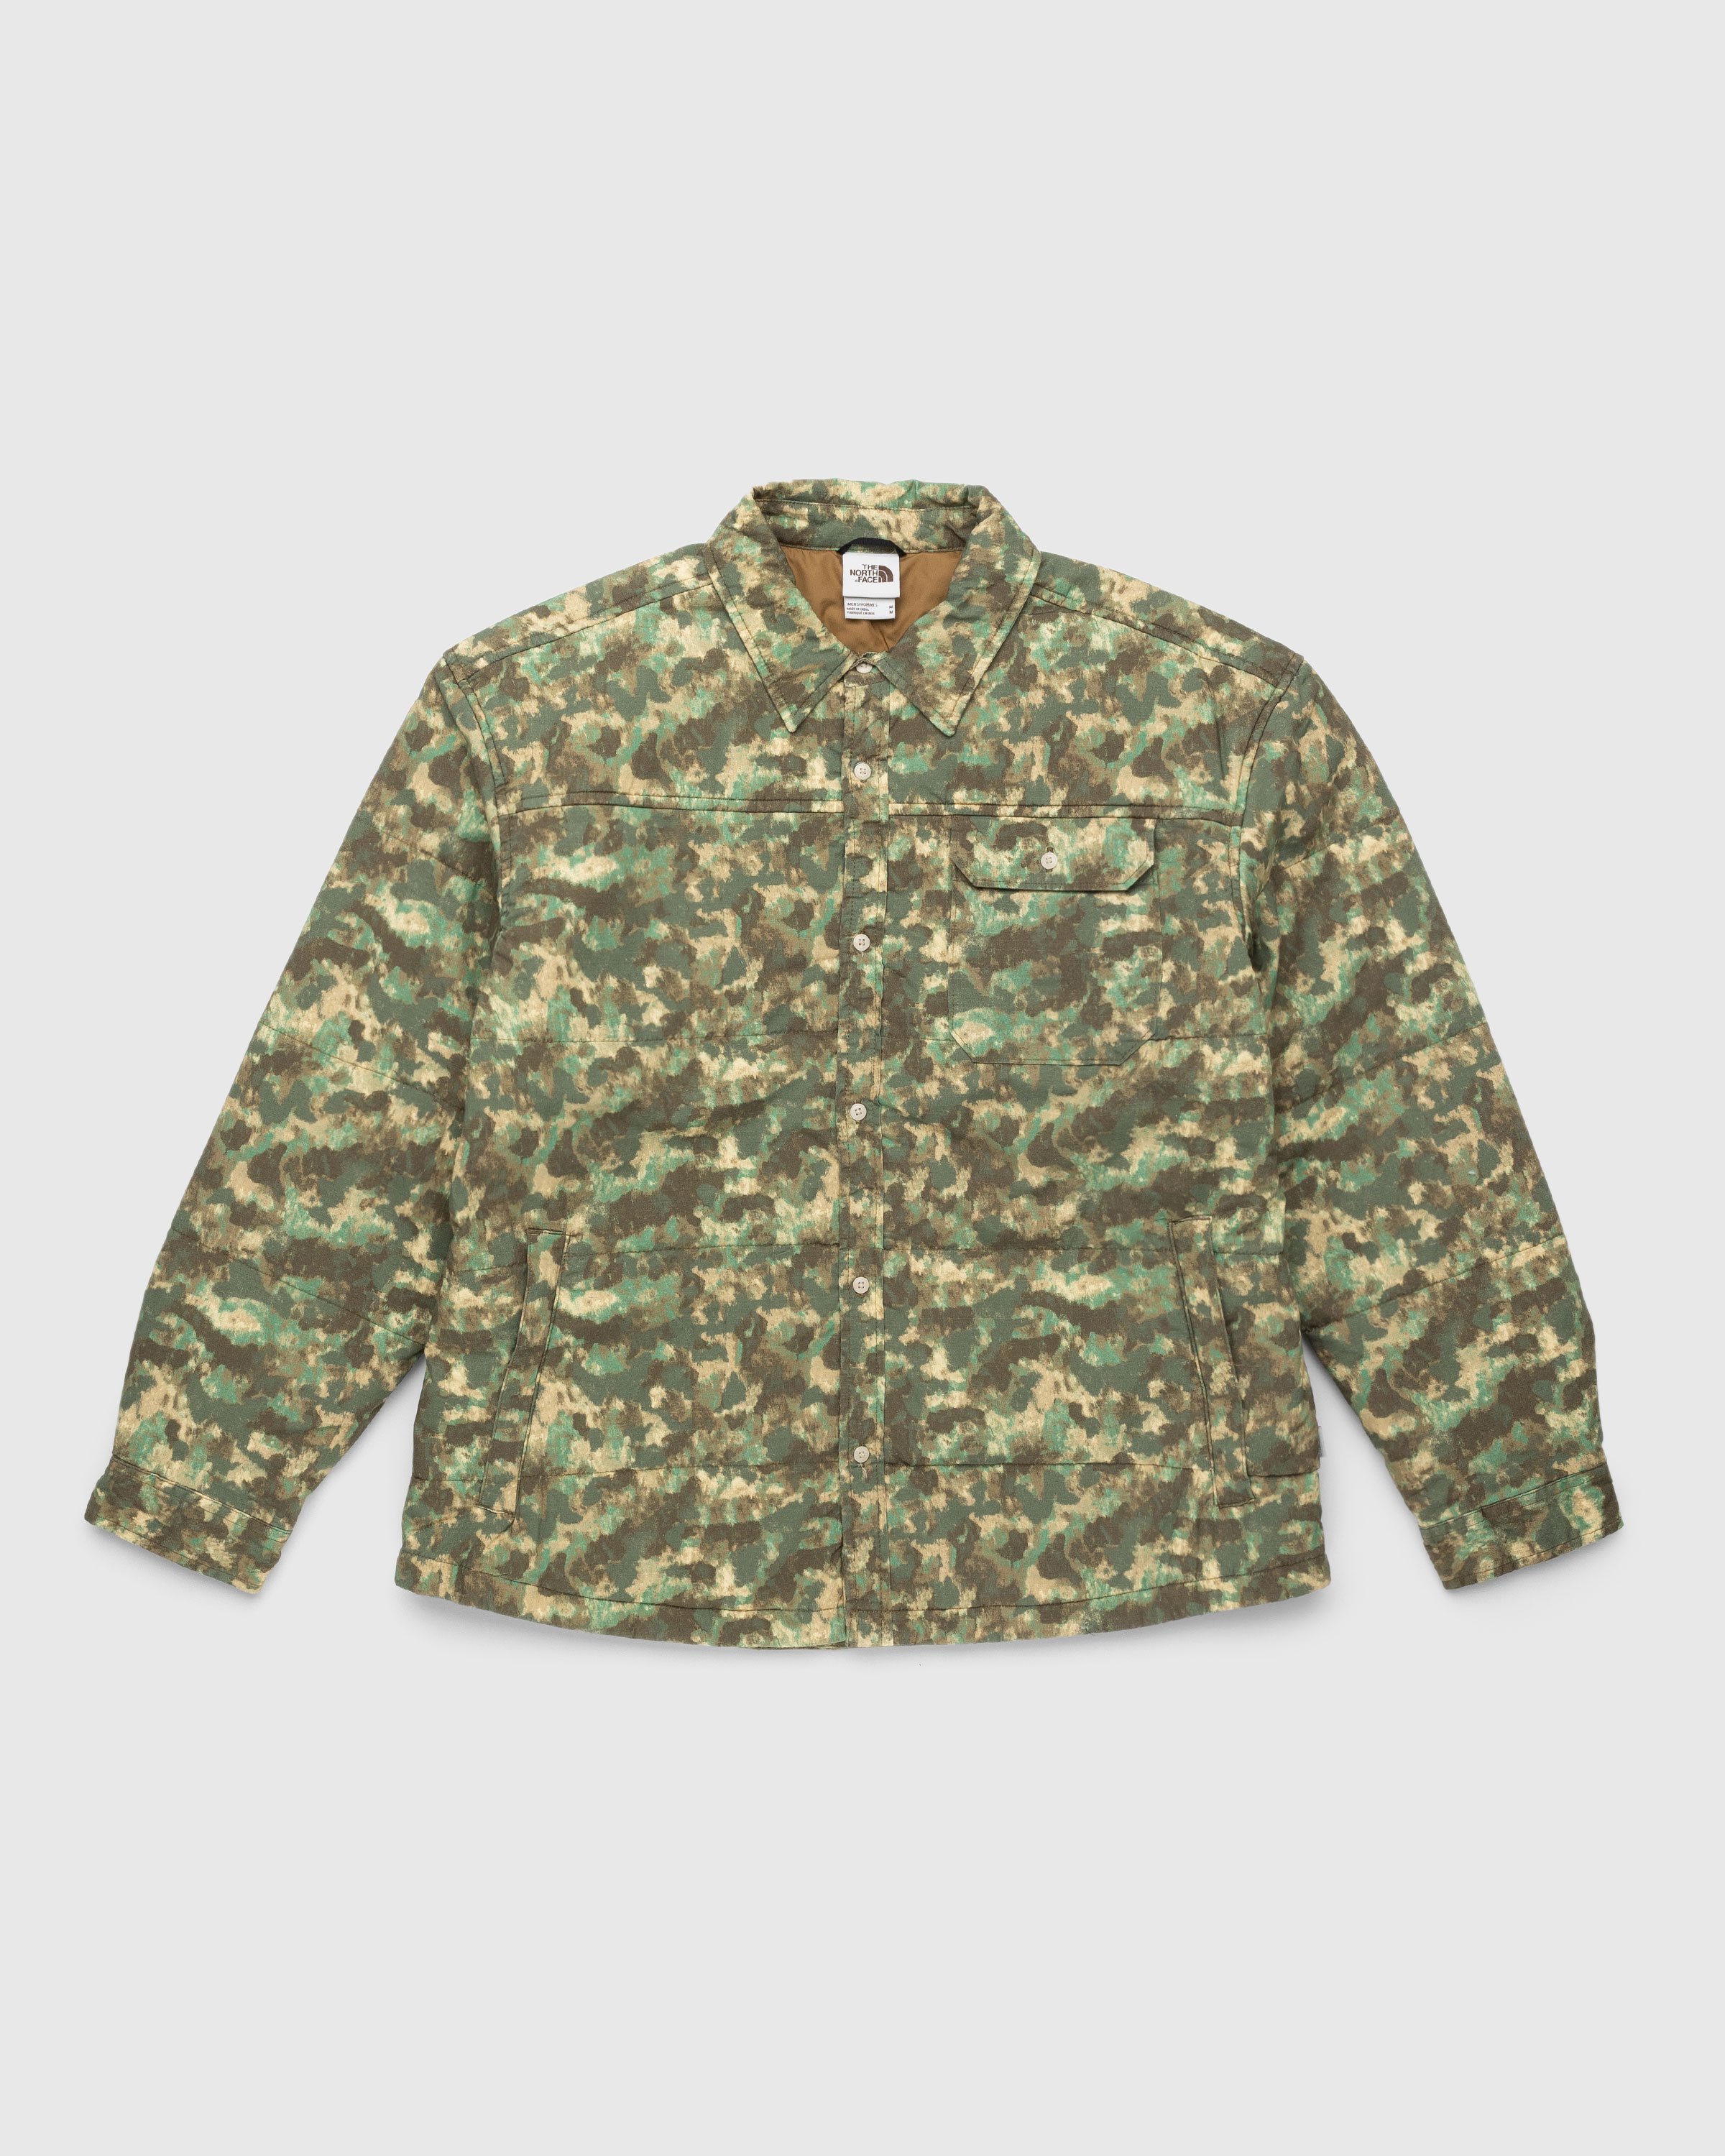 The North Face - M66 Utility Rain Jacket Military Olive/Stippled Camo Print - Clothing - Green - Image 1